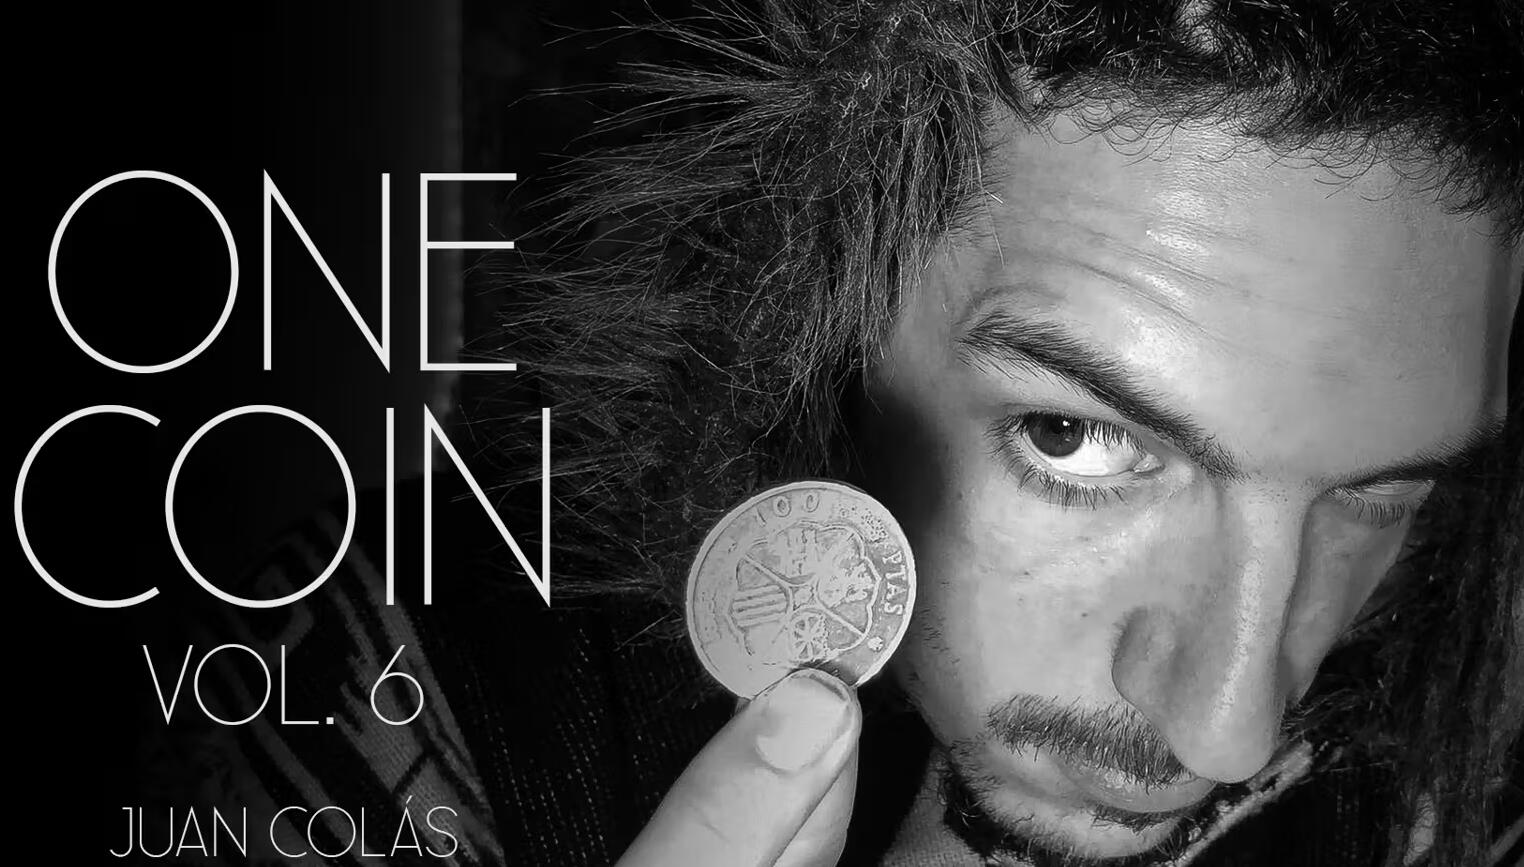 Juan Colás - One Coin: Vol.6 - The Impossible Co.